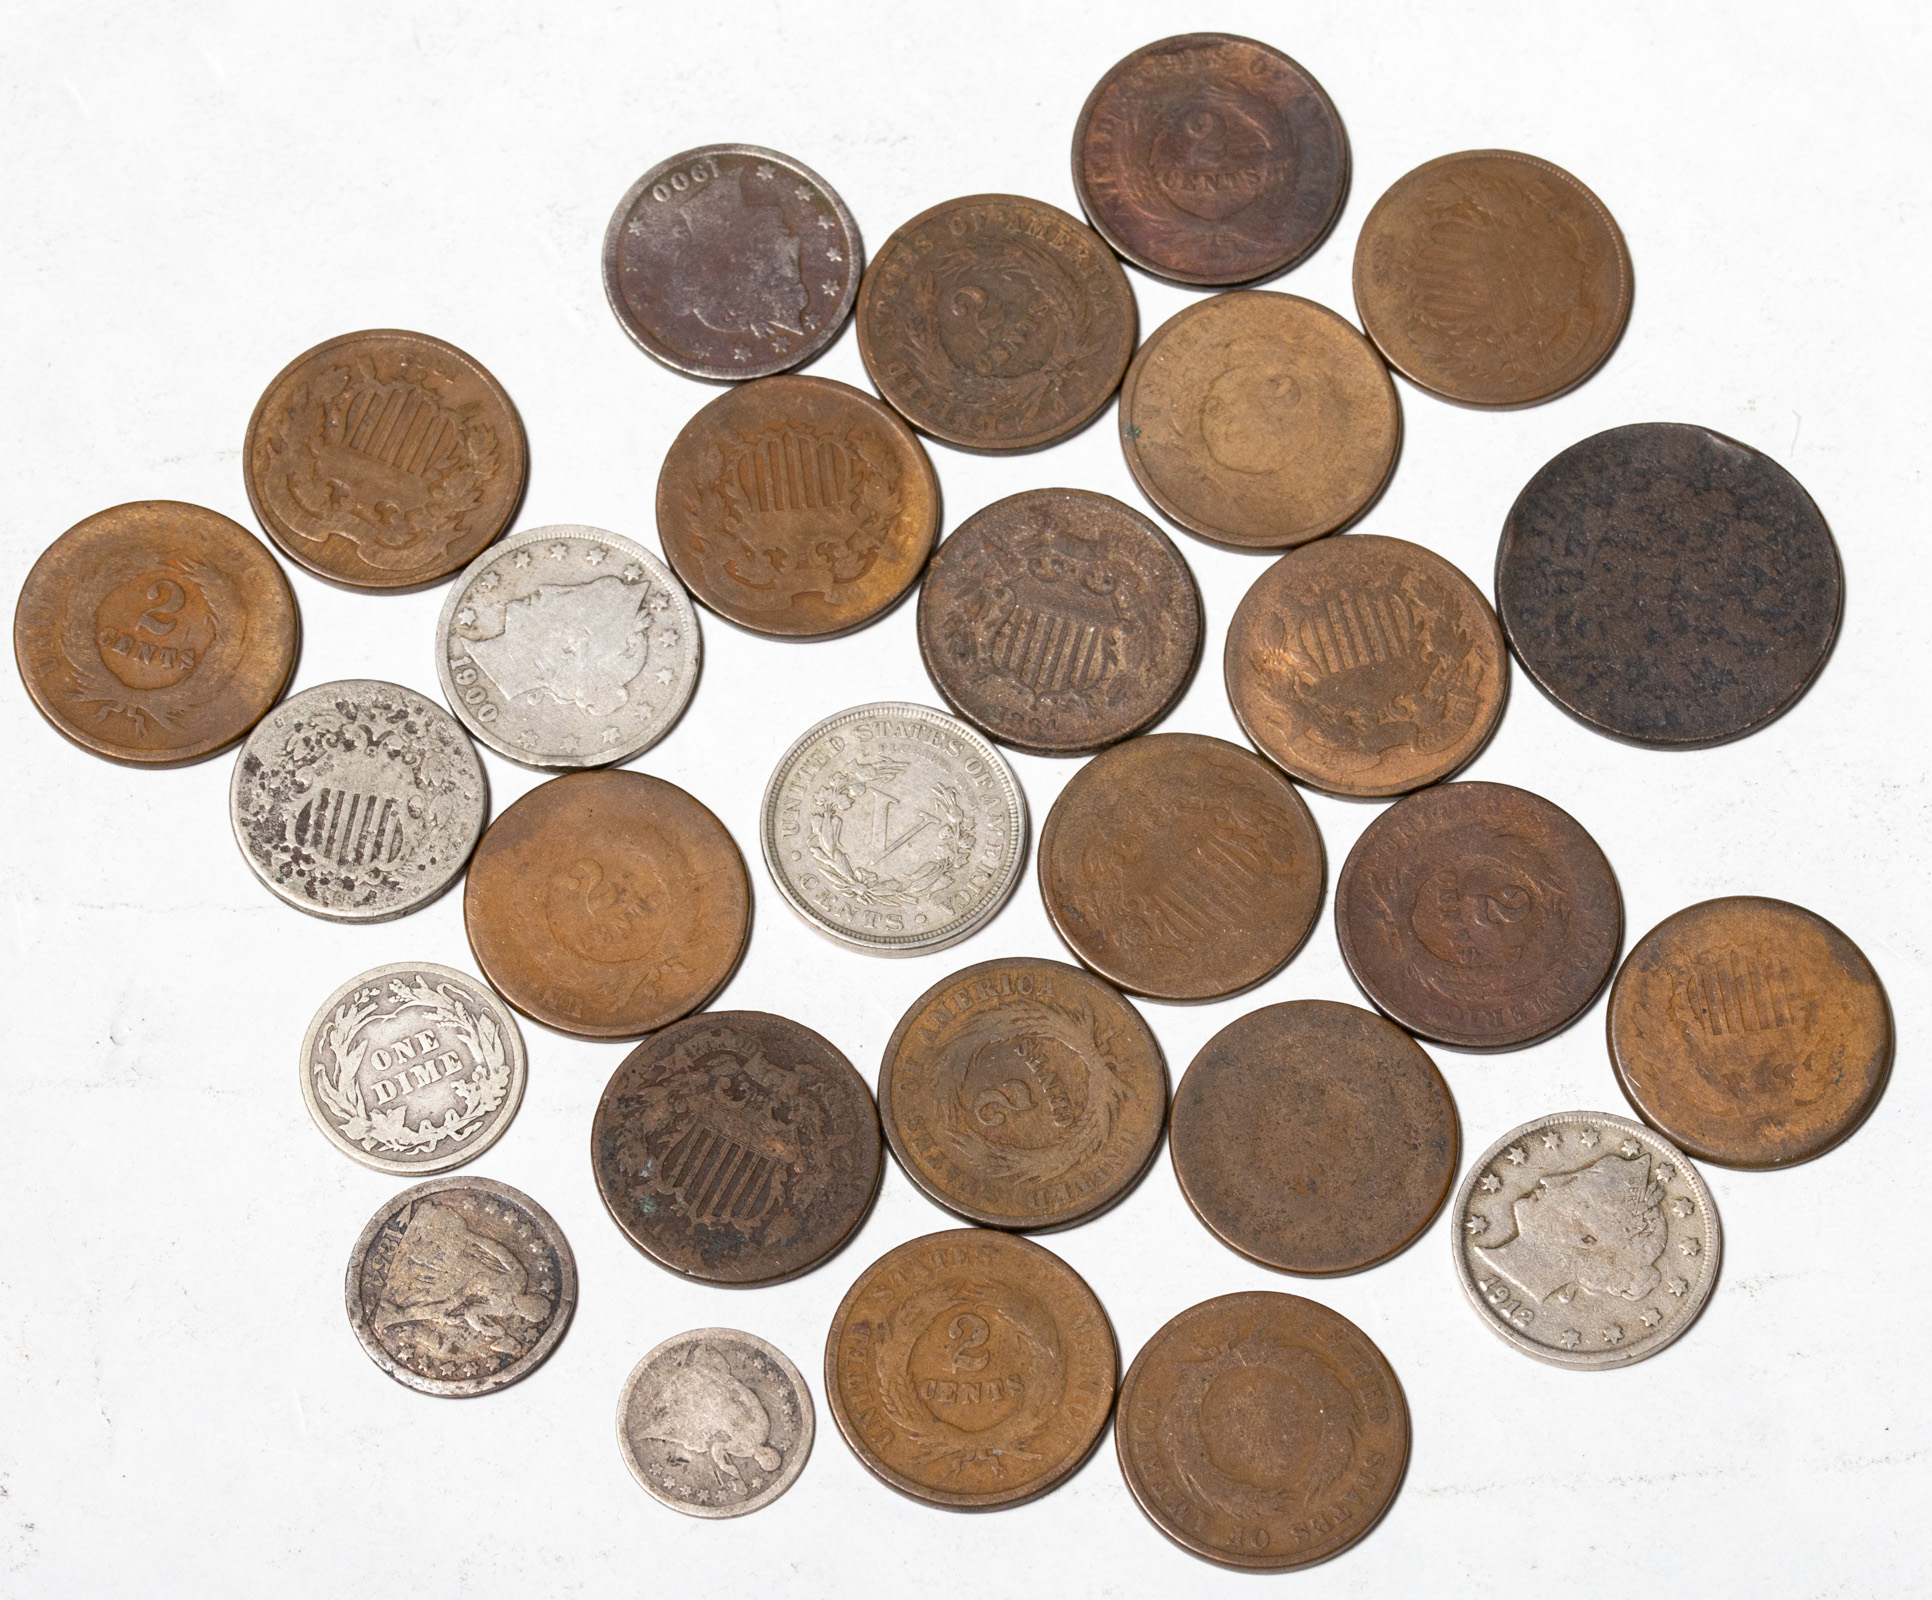 SMALL BAG OF CULL-TYPE COINS 18